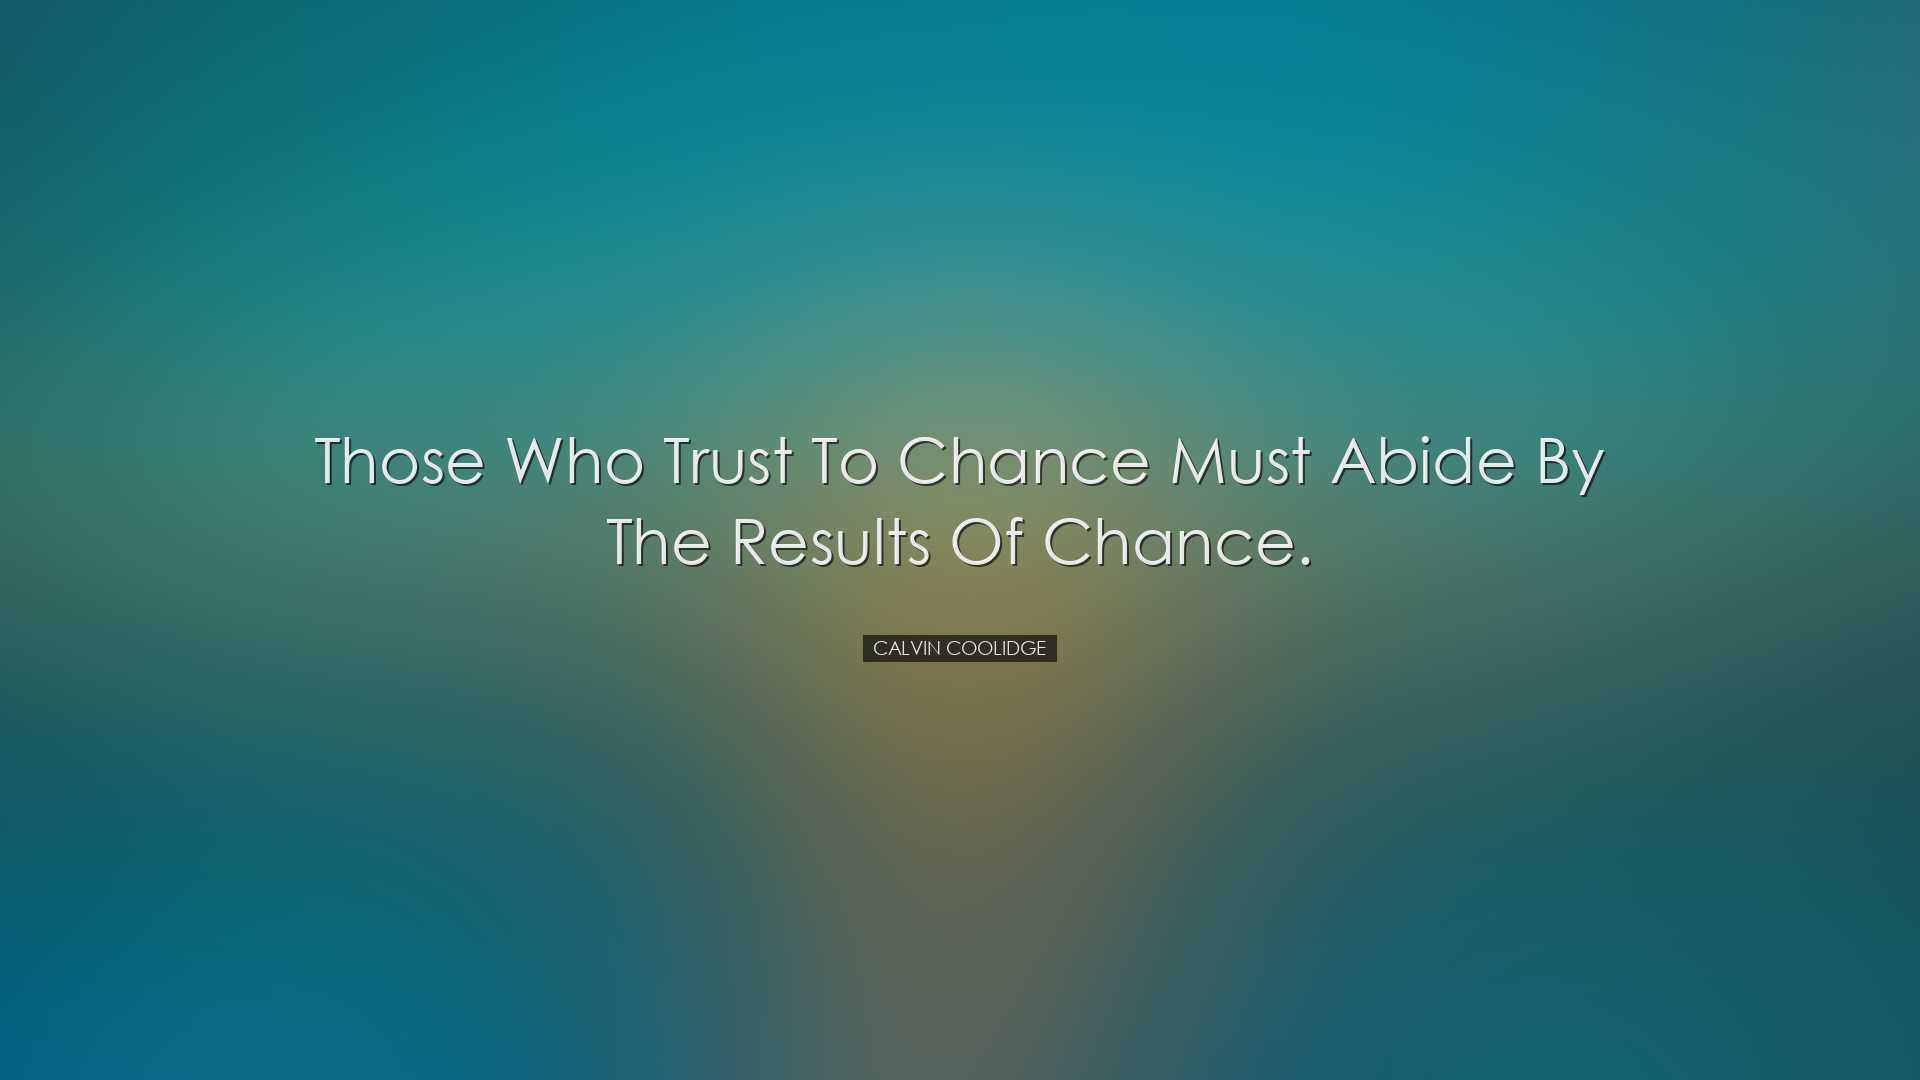 Those who trust to chance must abide by the results of chance. - C